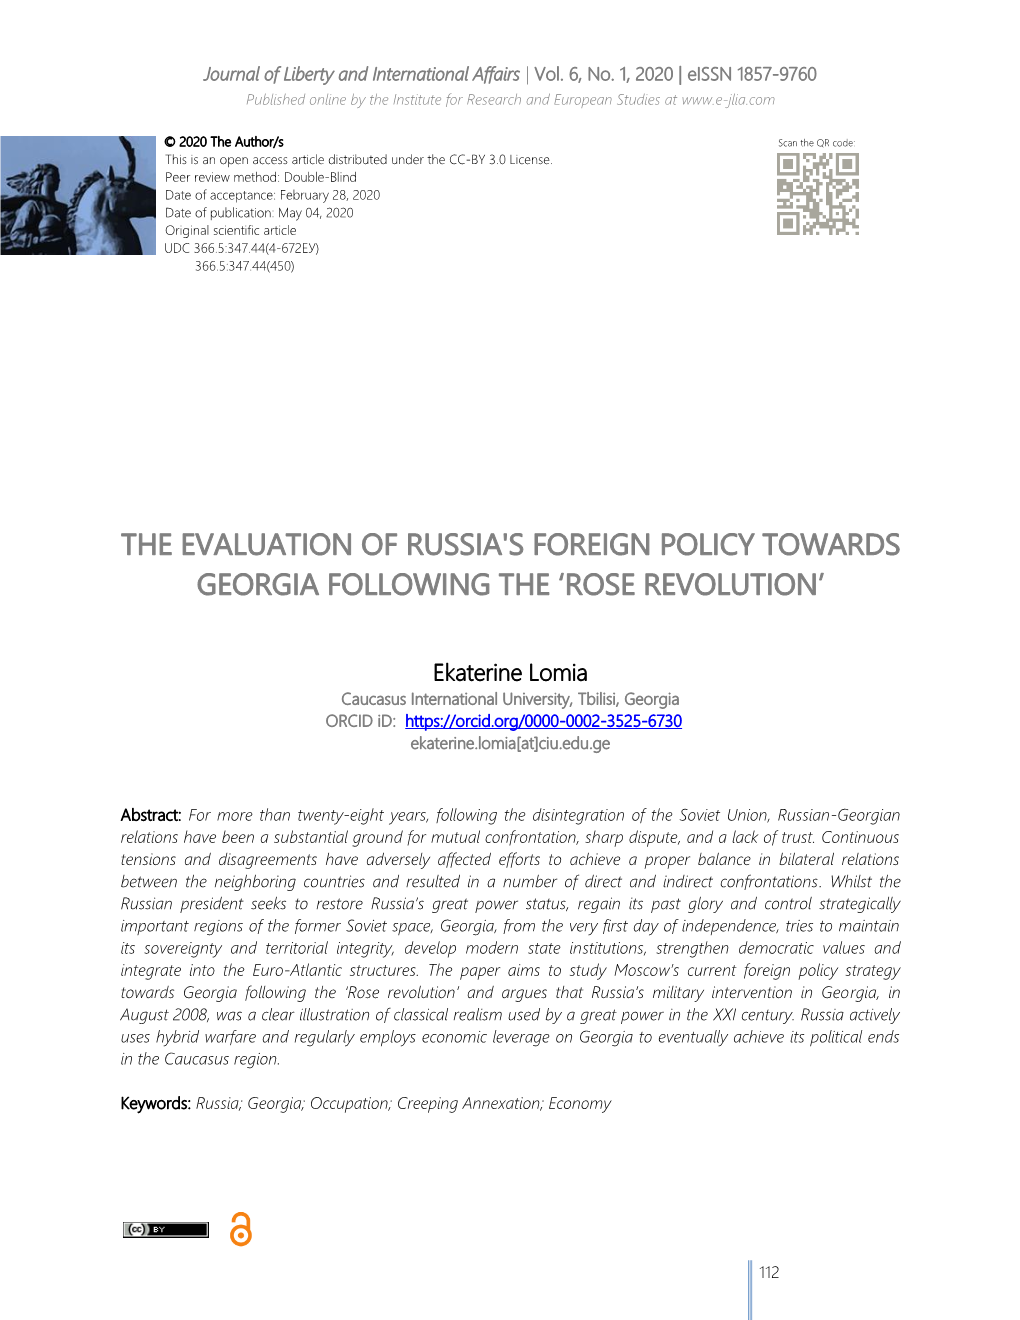 The Evaluation of Russia's Foreign Policy Towards Georgia Following the ‘Rose Revolution’